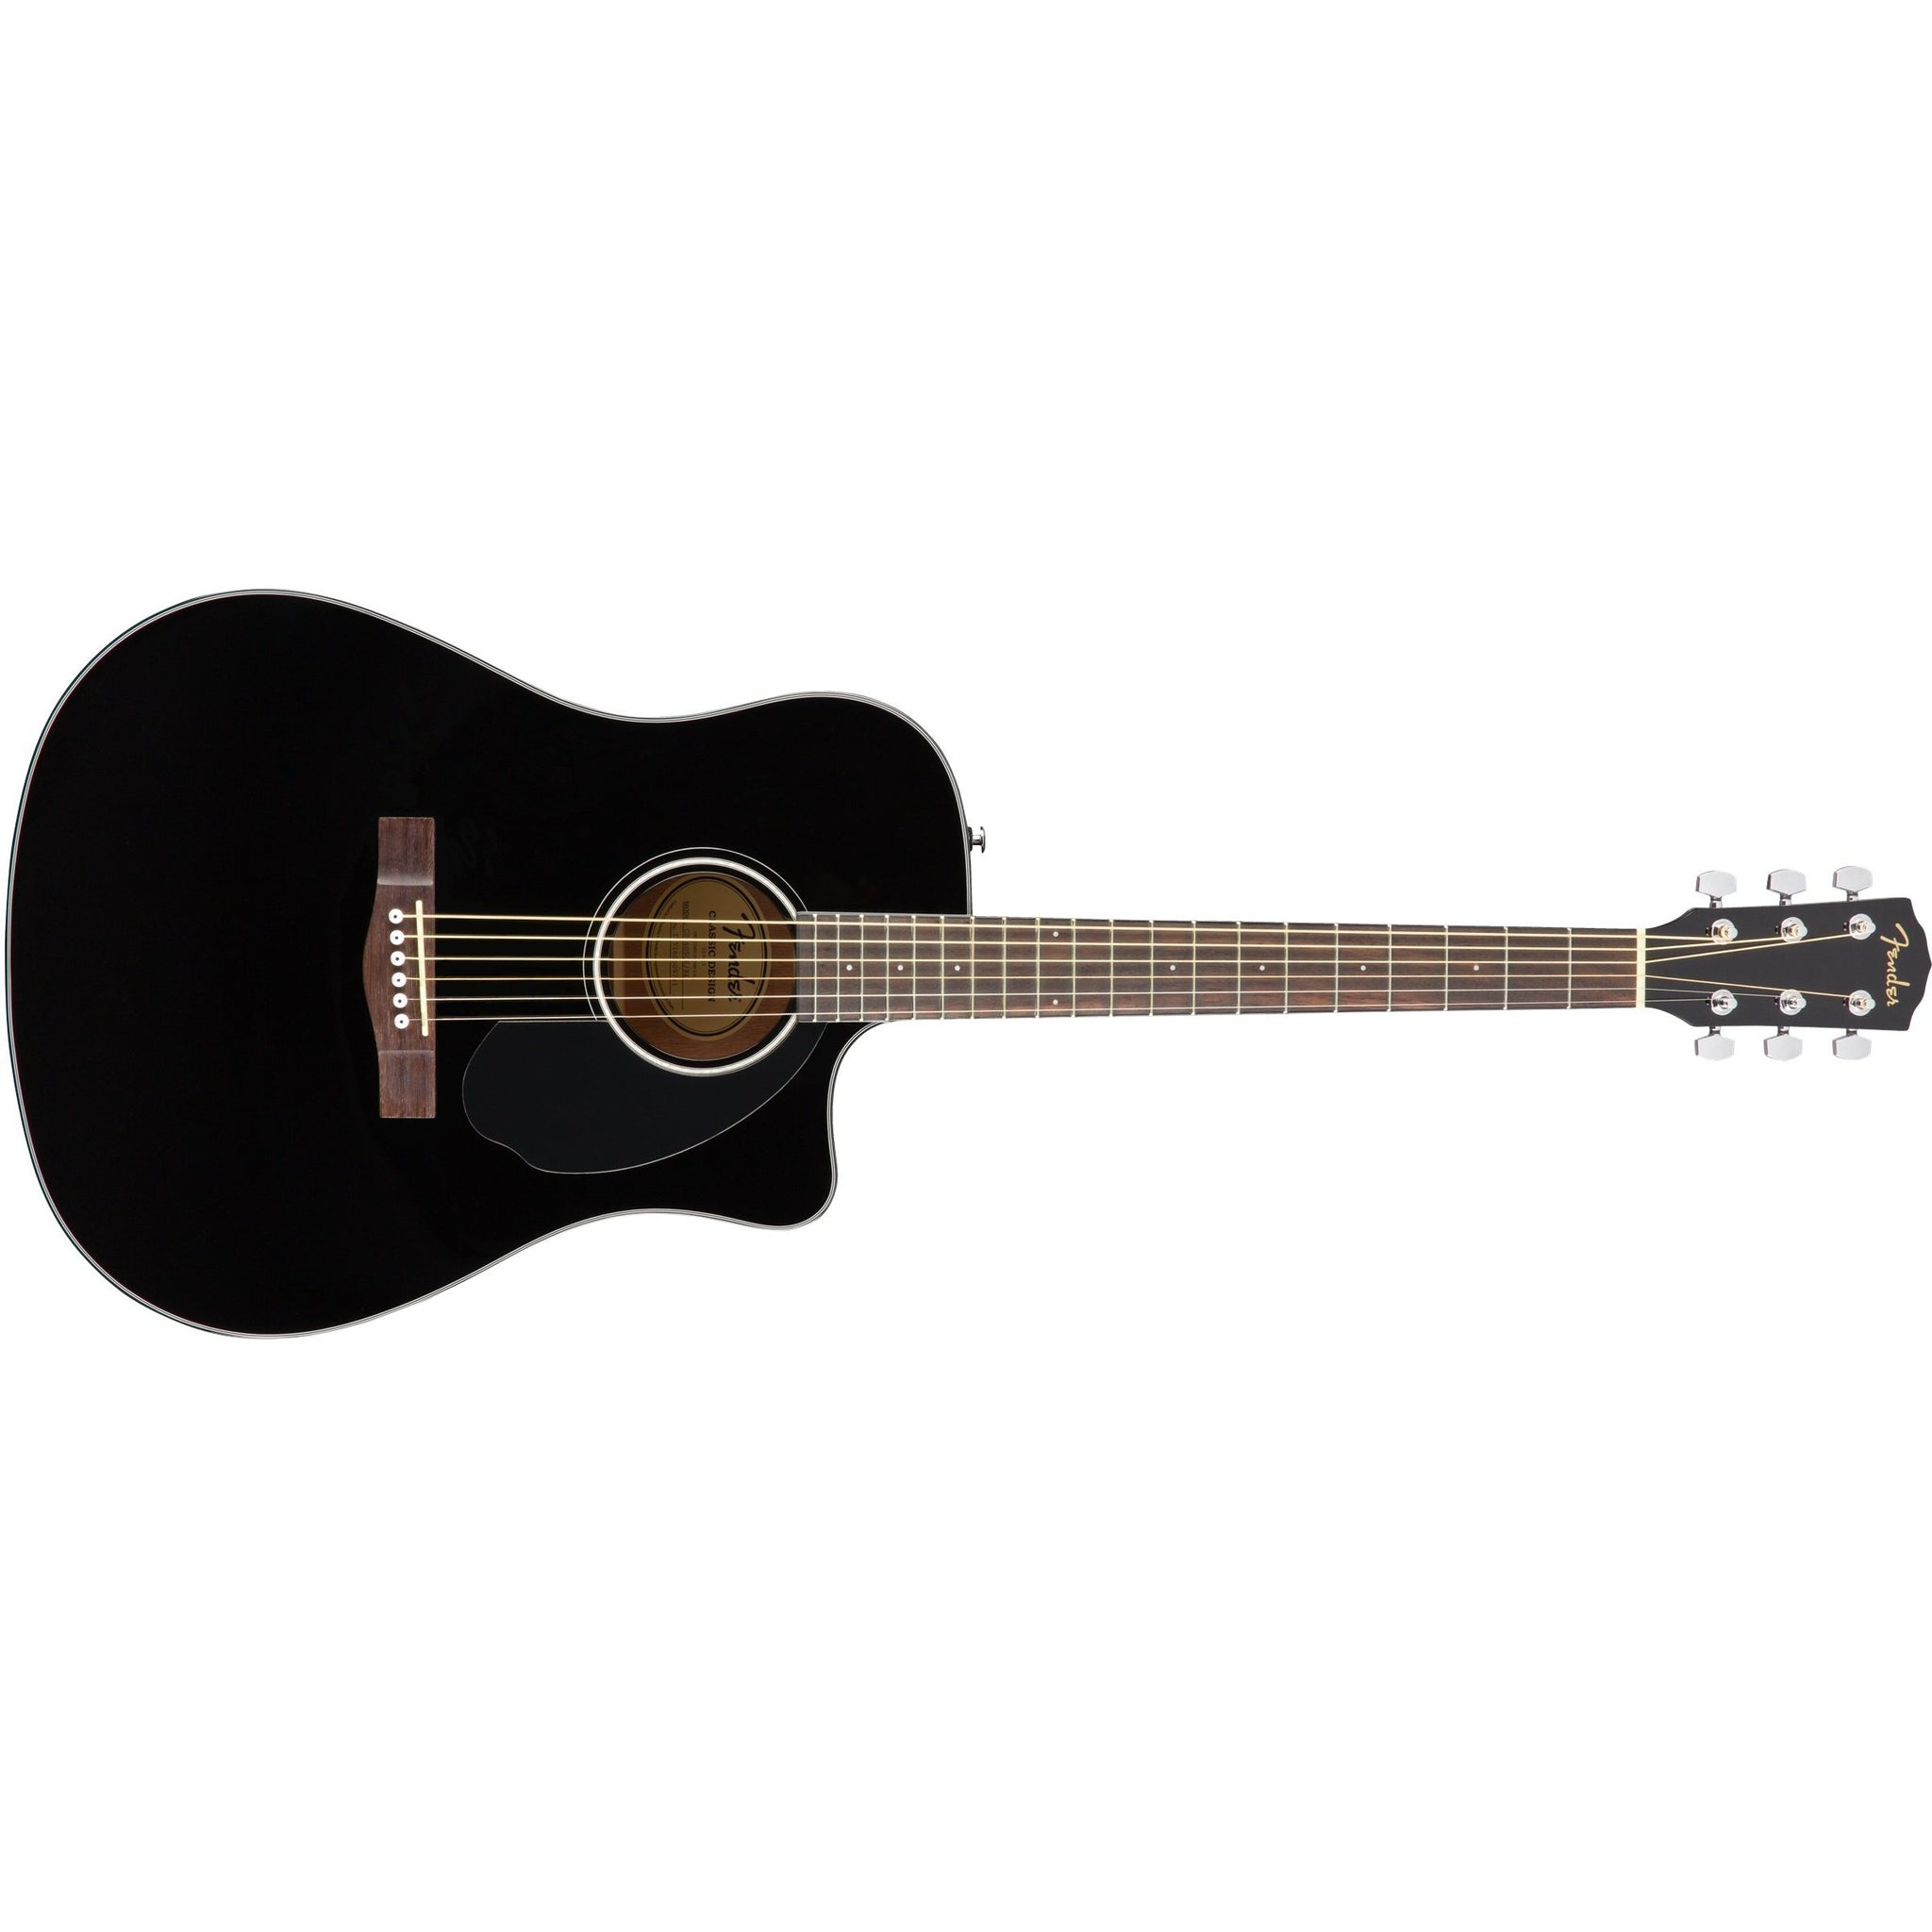 Fender CD-60SCE Dreadnought Acoustic/Electric Guitar-Black-Music World Academy